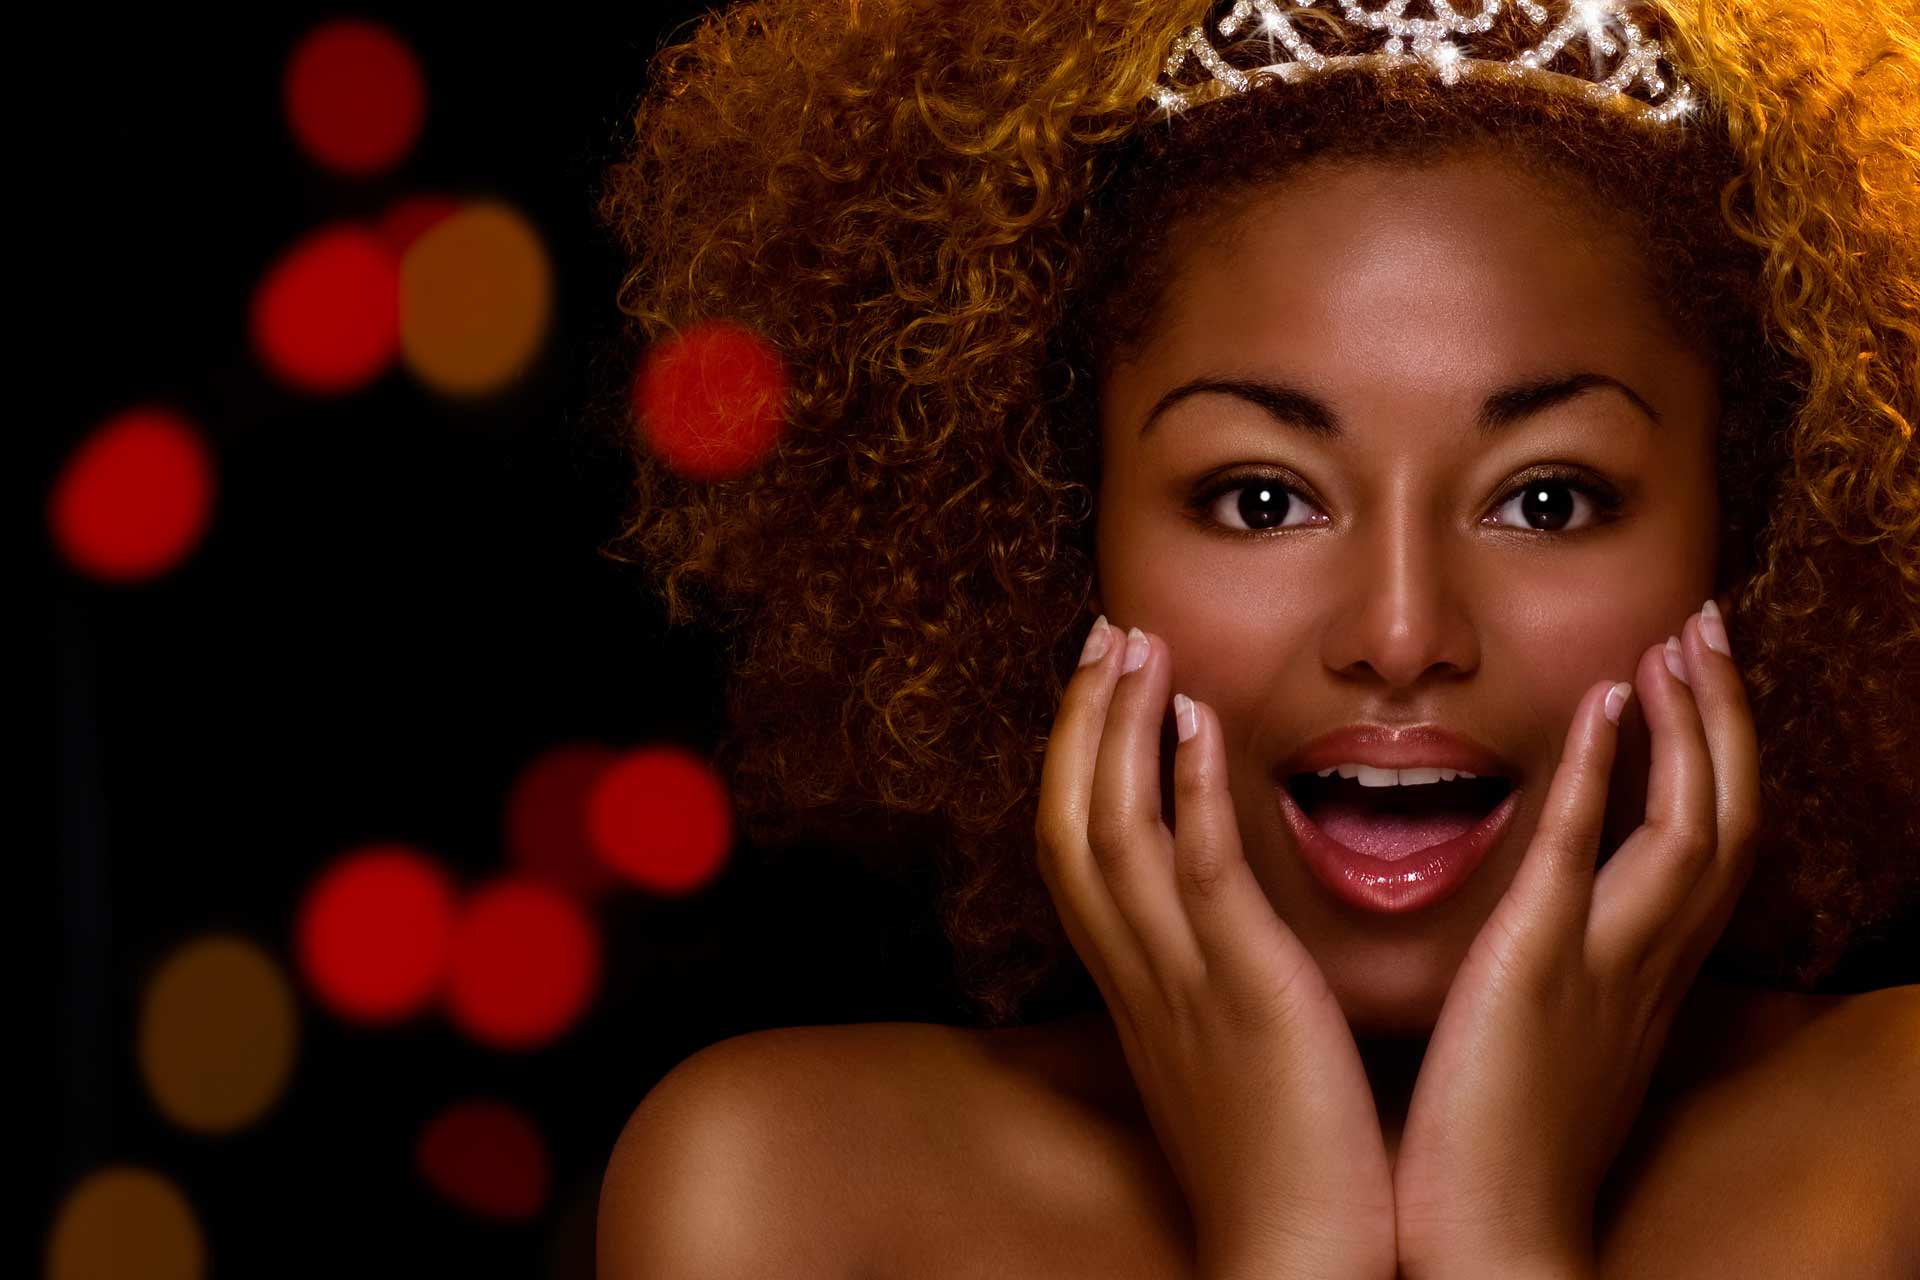 Black princess with hands on face in a surprise look; black background with red and gold blurred lights.